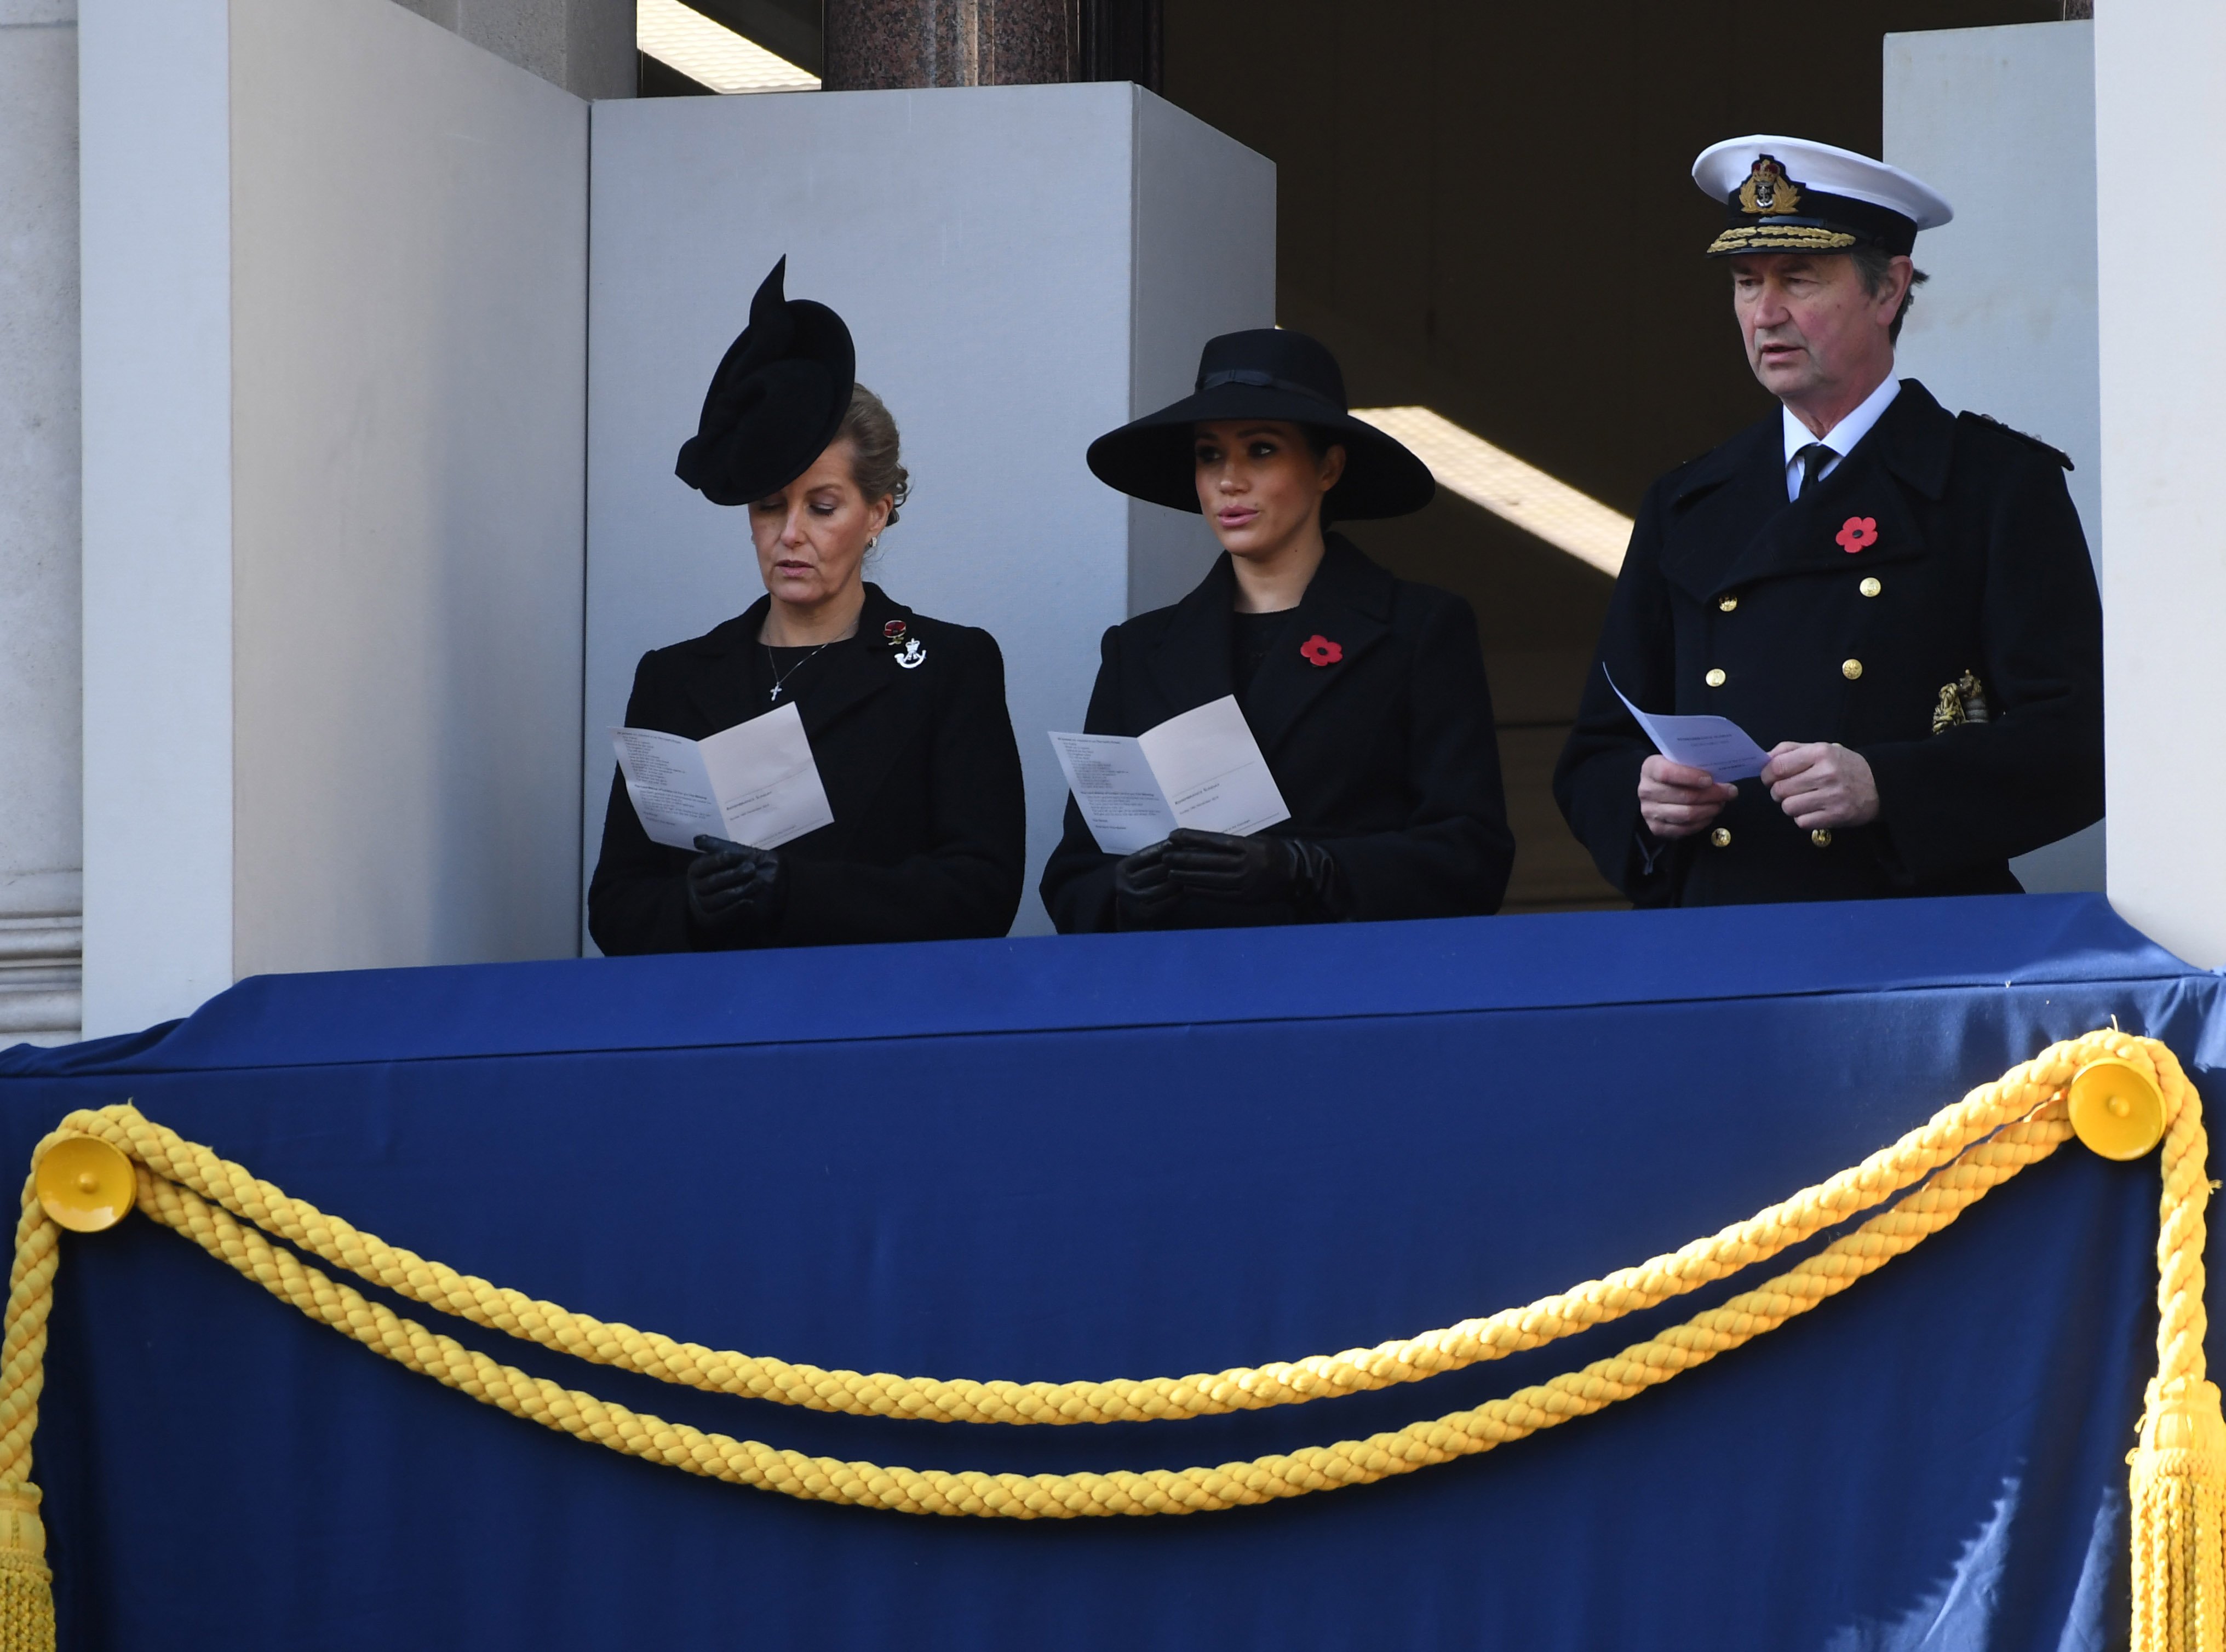  Sophie, Countess of Wessex, Meghan, Duchess of Sussex and Vice Admiral Sir Timothy Laurence attends the annual Remembrance Sunday memorial at The Cenotaph on November 10, 2019, in London, England. | Source: Getty Images.